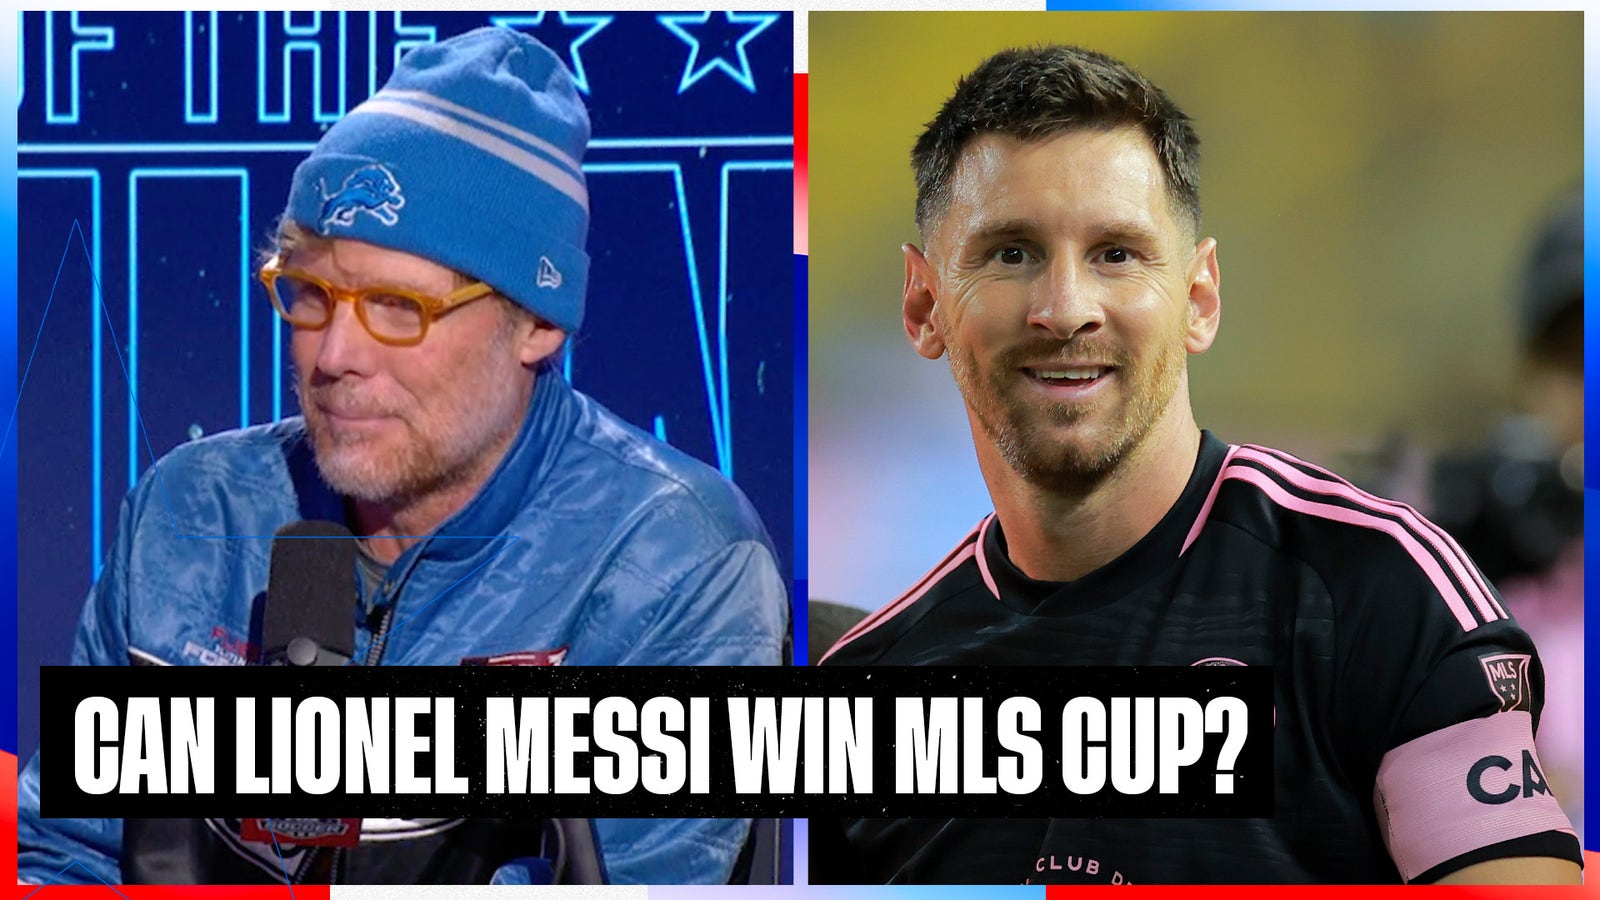 If Lionel Messi wins MLS Cup, is it good or bad for MLS? 